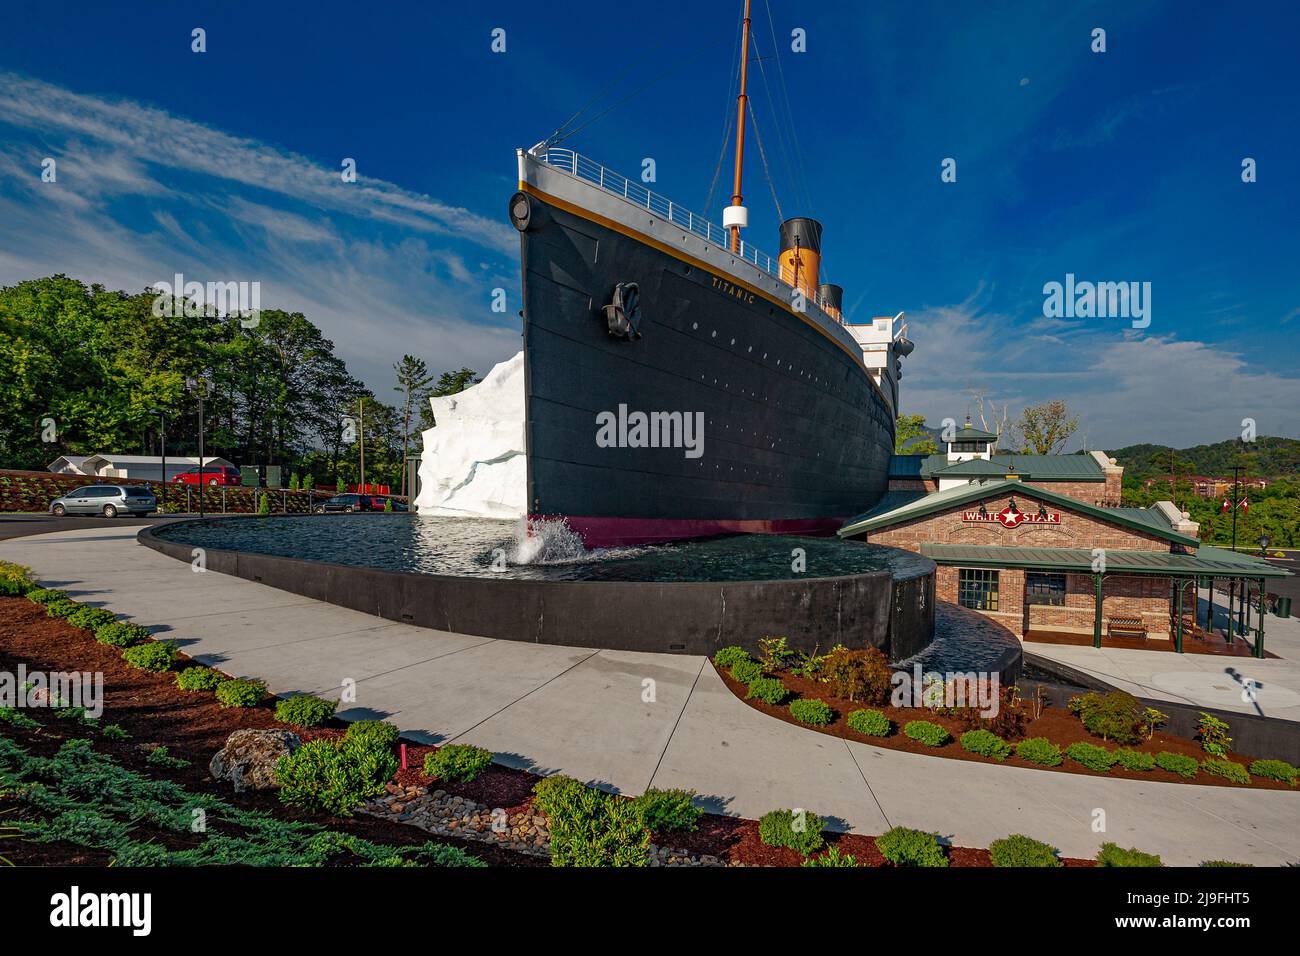 The Titanic Museum in Pigeon Forge Tenn.USA Stock Photo